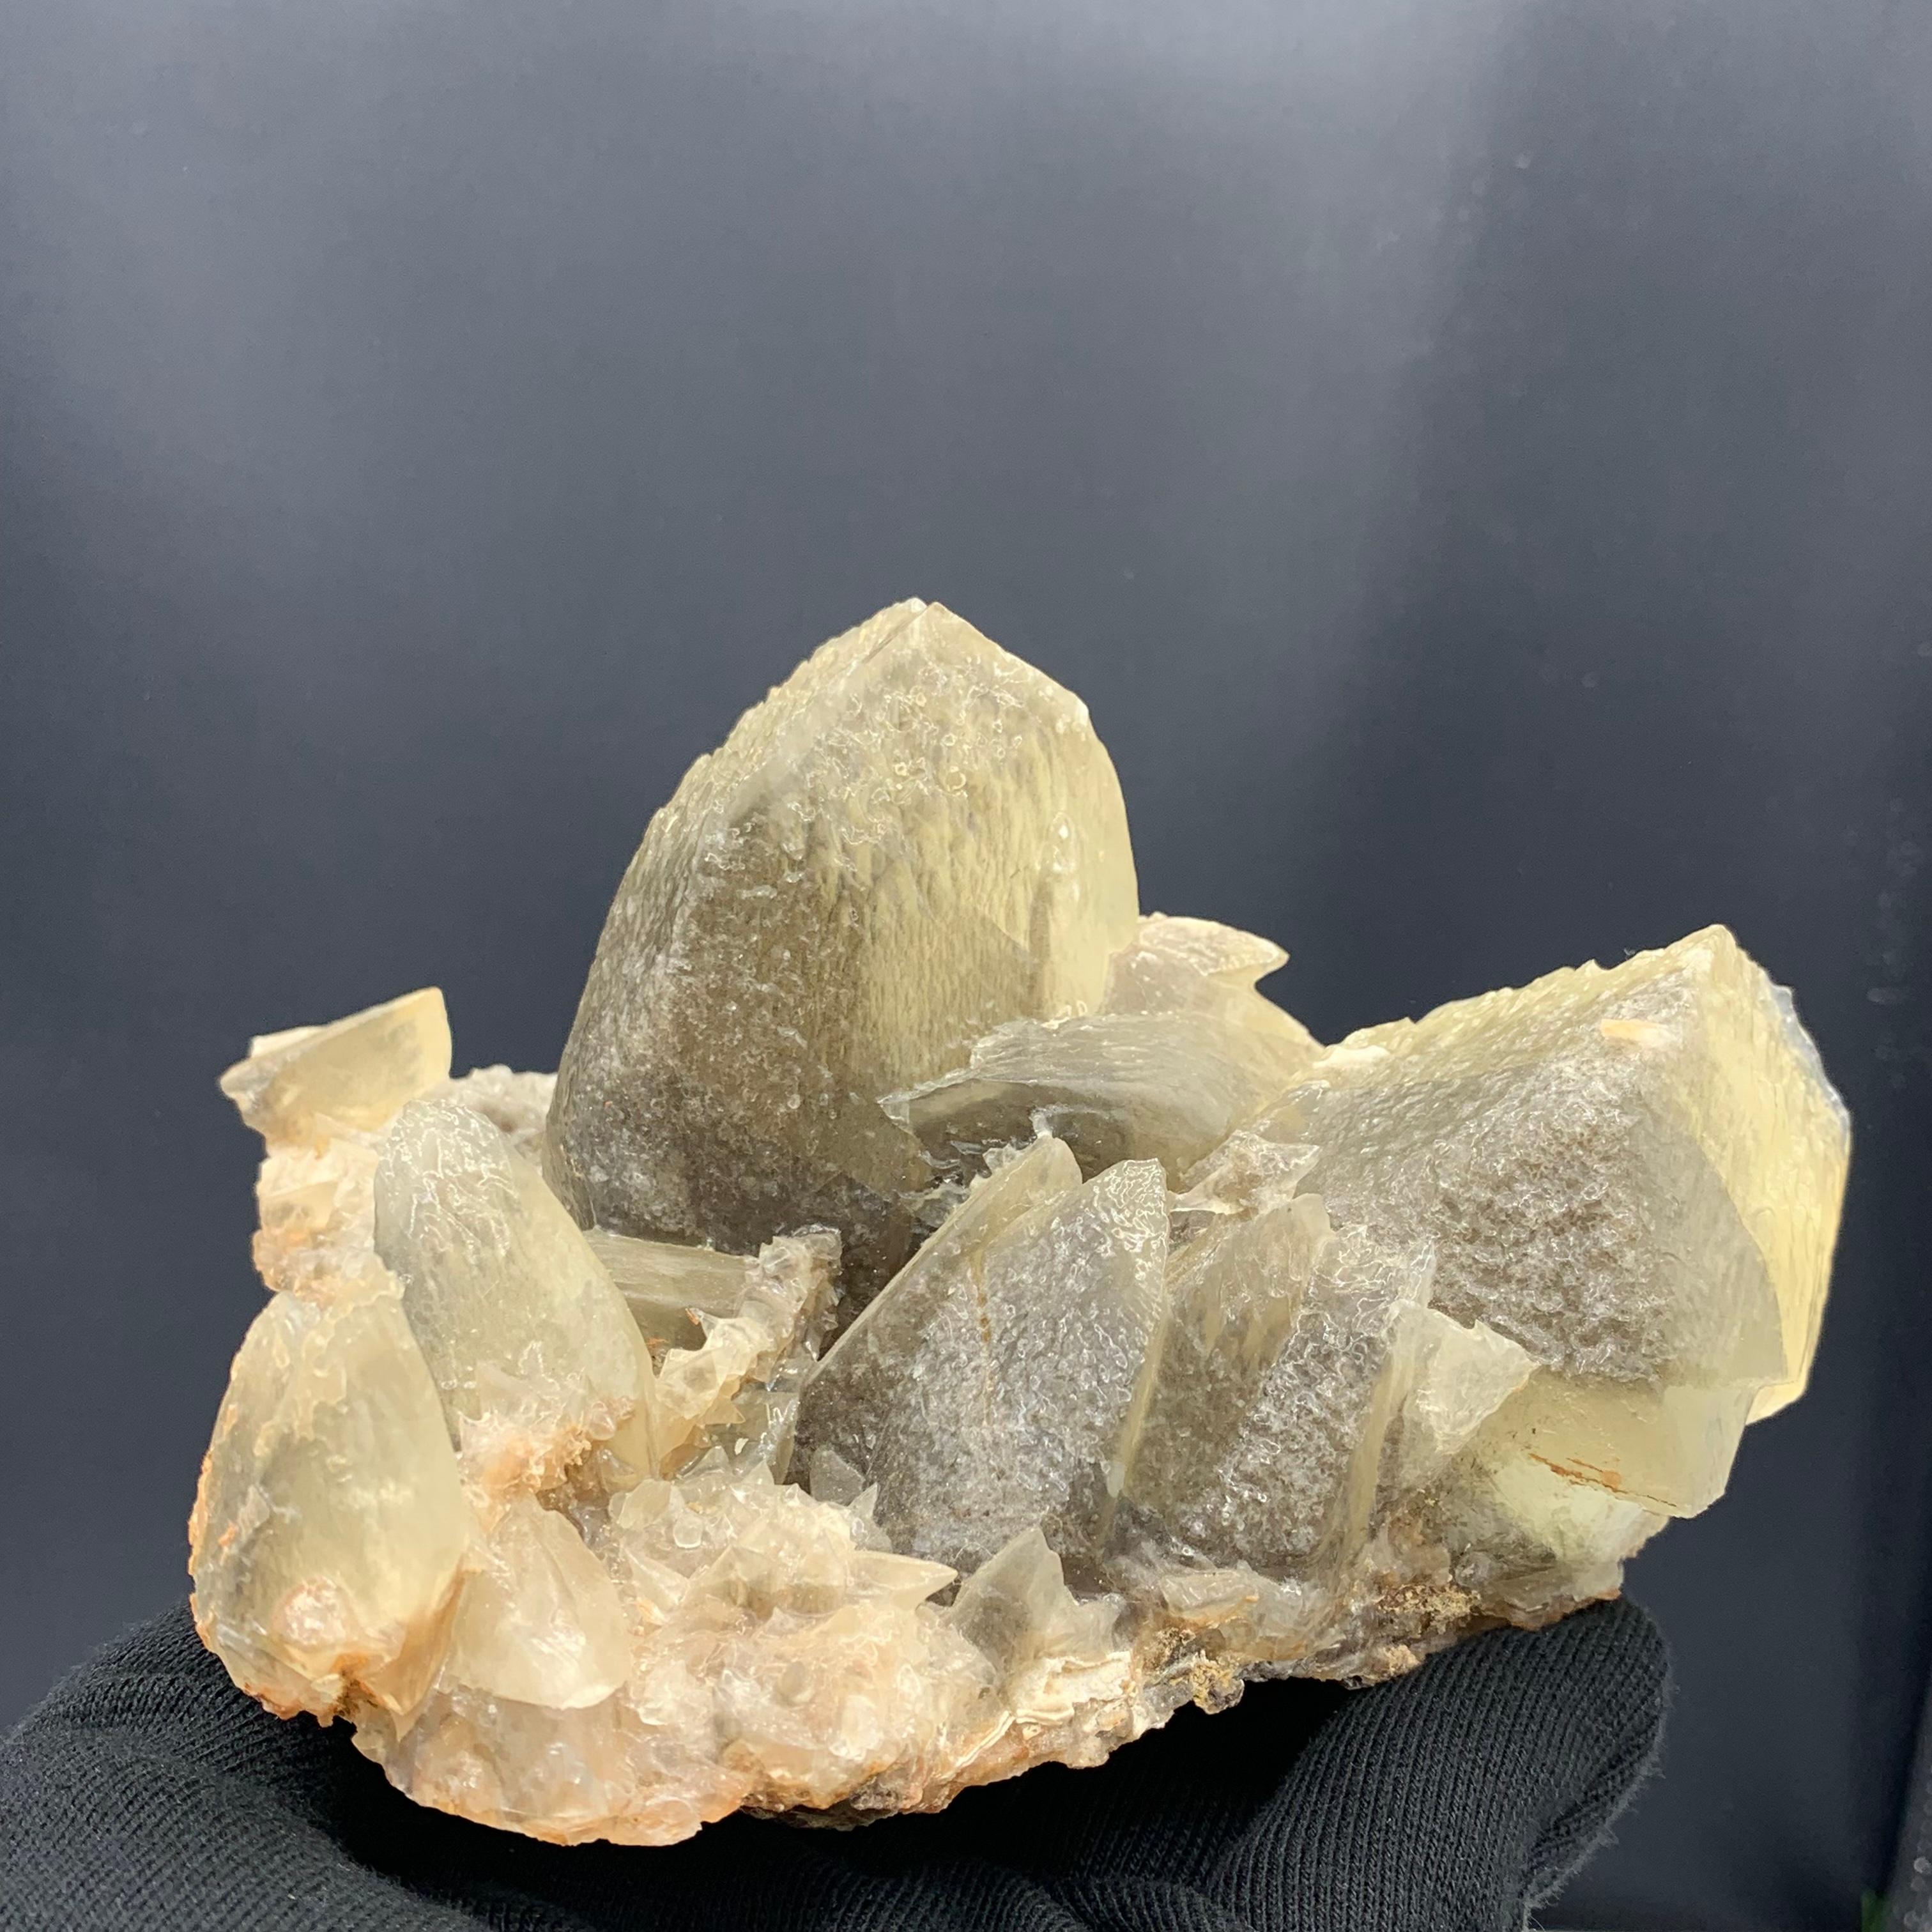 1200 Plus Gram Gorgeous Calcite Specimen From Balochistan, Pakistan 
Weight: 1200+ gram 
Dimension: 8.8 x 15.1 x 11.7 Cm
Origin: Balochistan, Pakistan 

Calcite crystal's properties make it one of the most widely used minerals. It is used as a